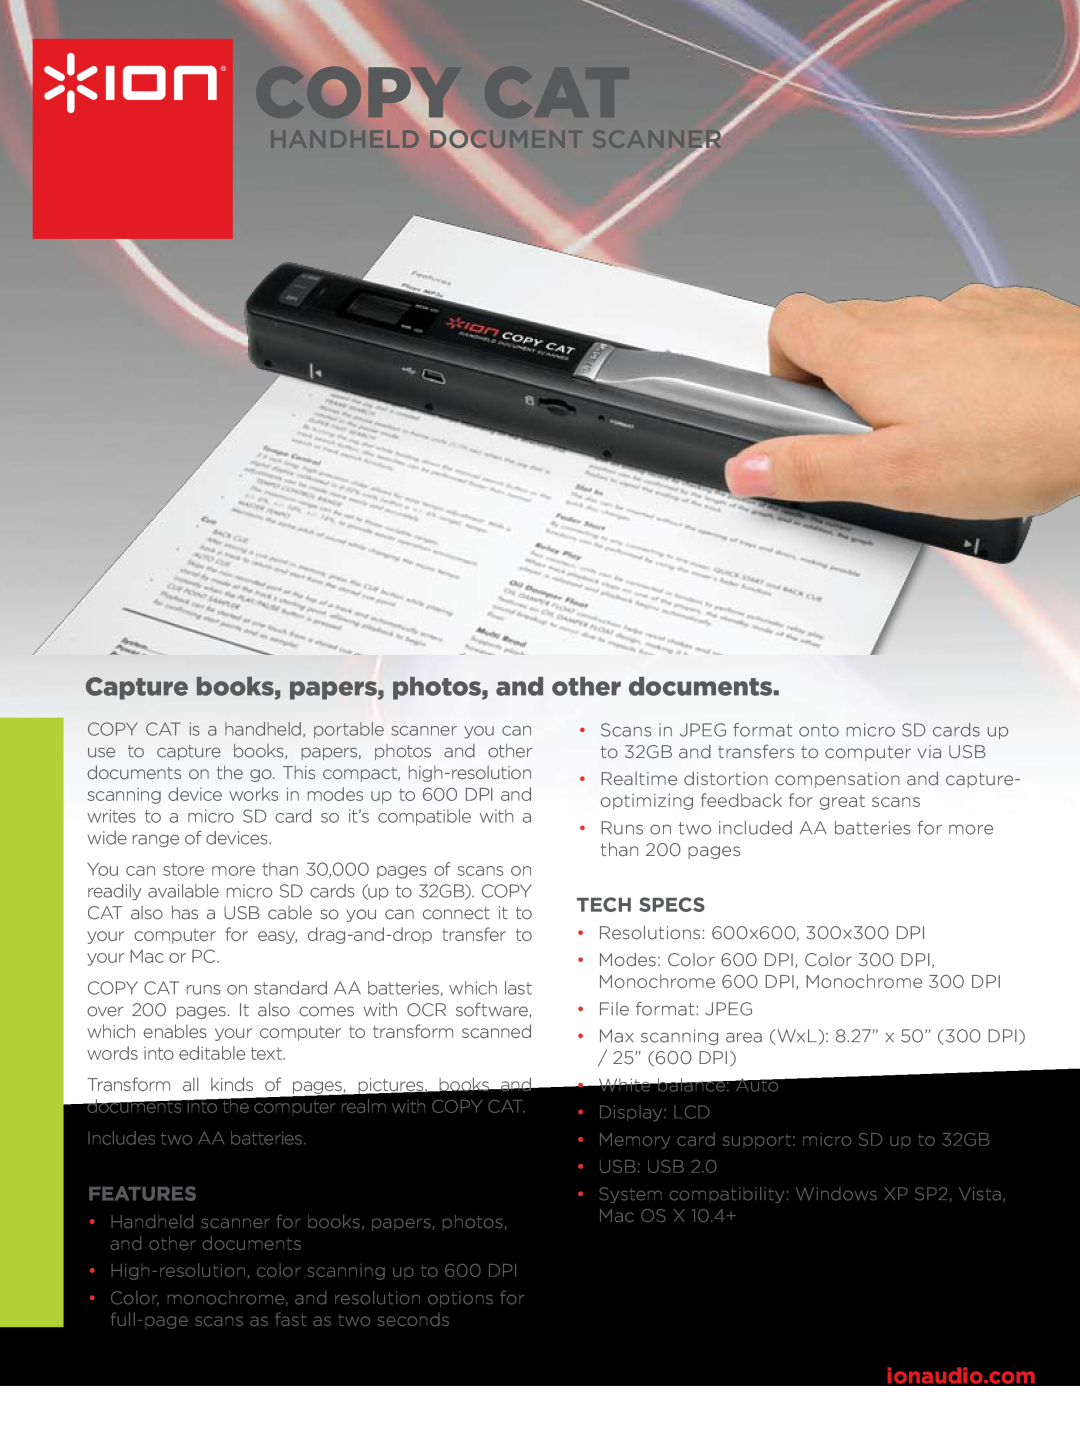 ION COPY CAT specifications Copy Cat, Handheld Document Scanner, Capture books, papers, photos, and other documents 